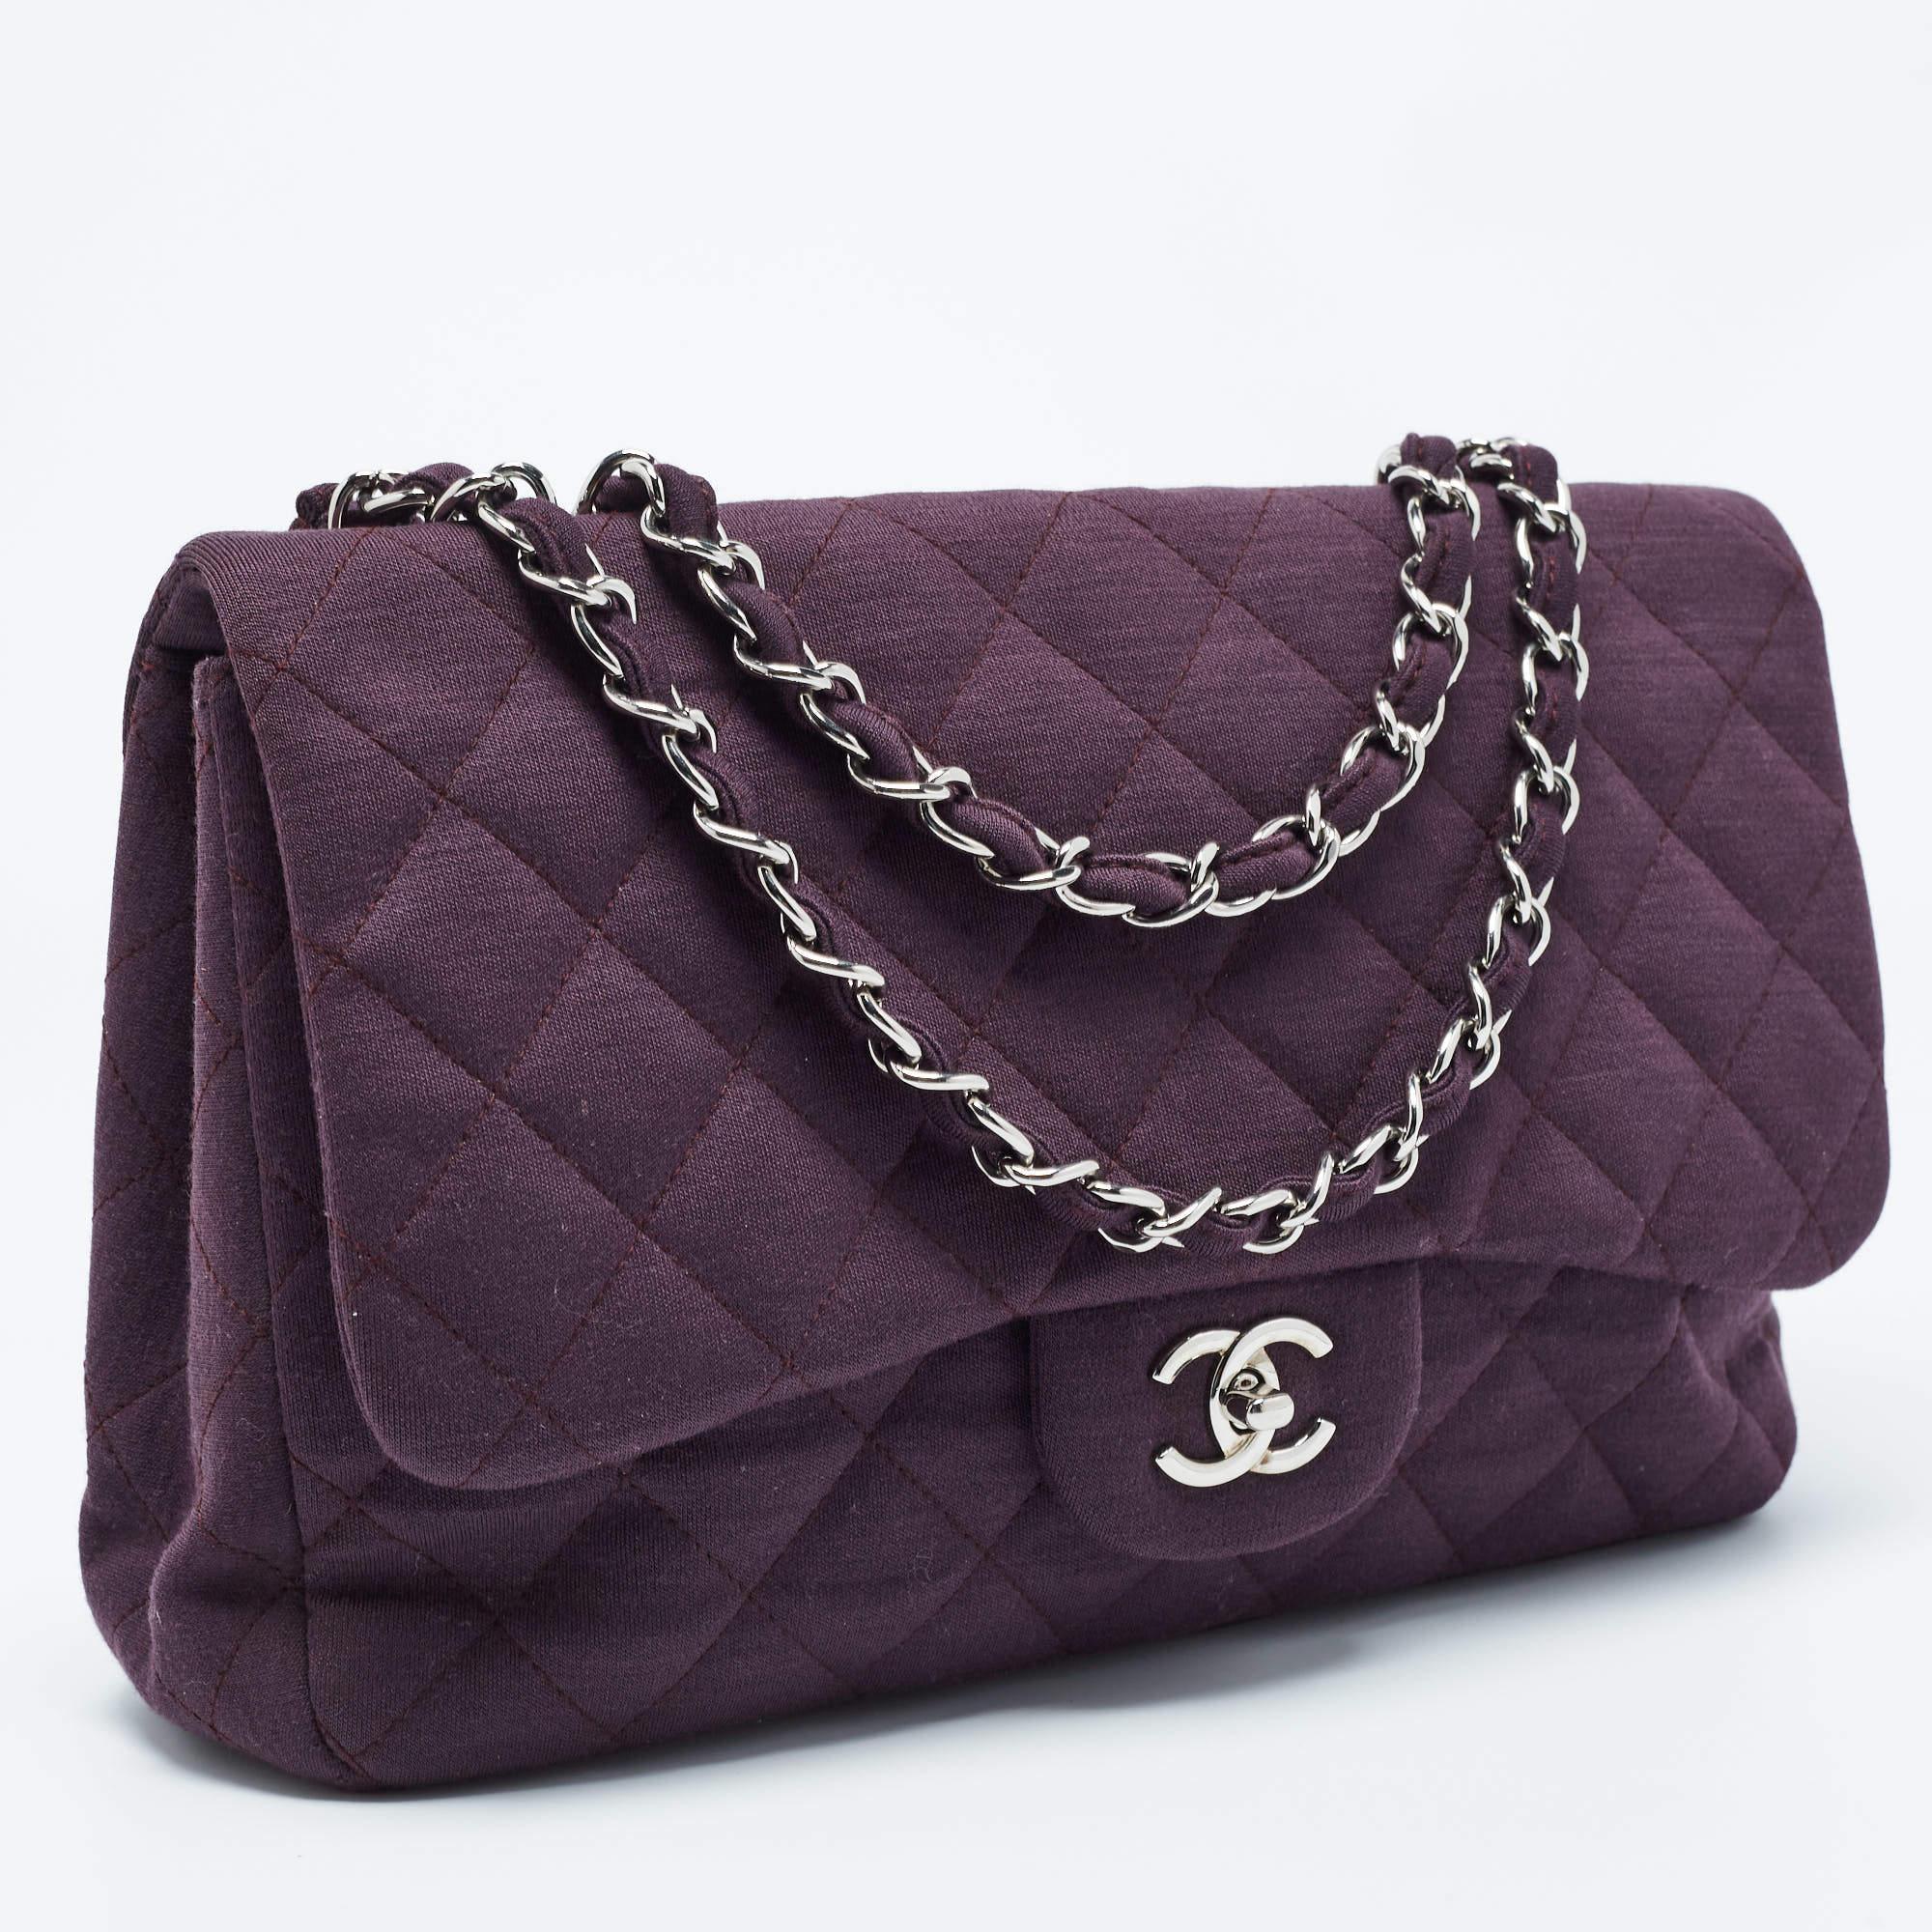 Chanel Dark Purple Quilted Jersey Jumbo Classic Single Flap Bag In Good Condition For Sale In Dubai, Al Qouz 2